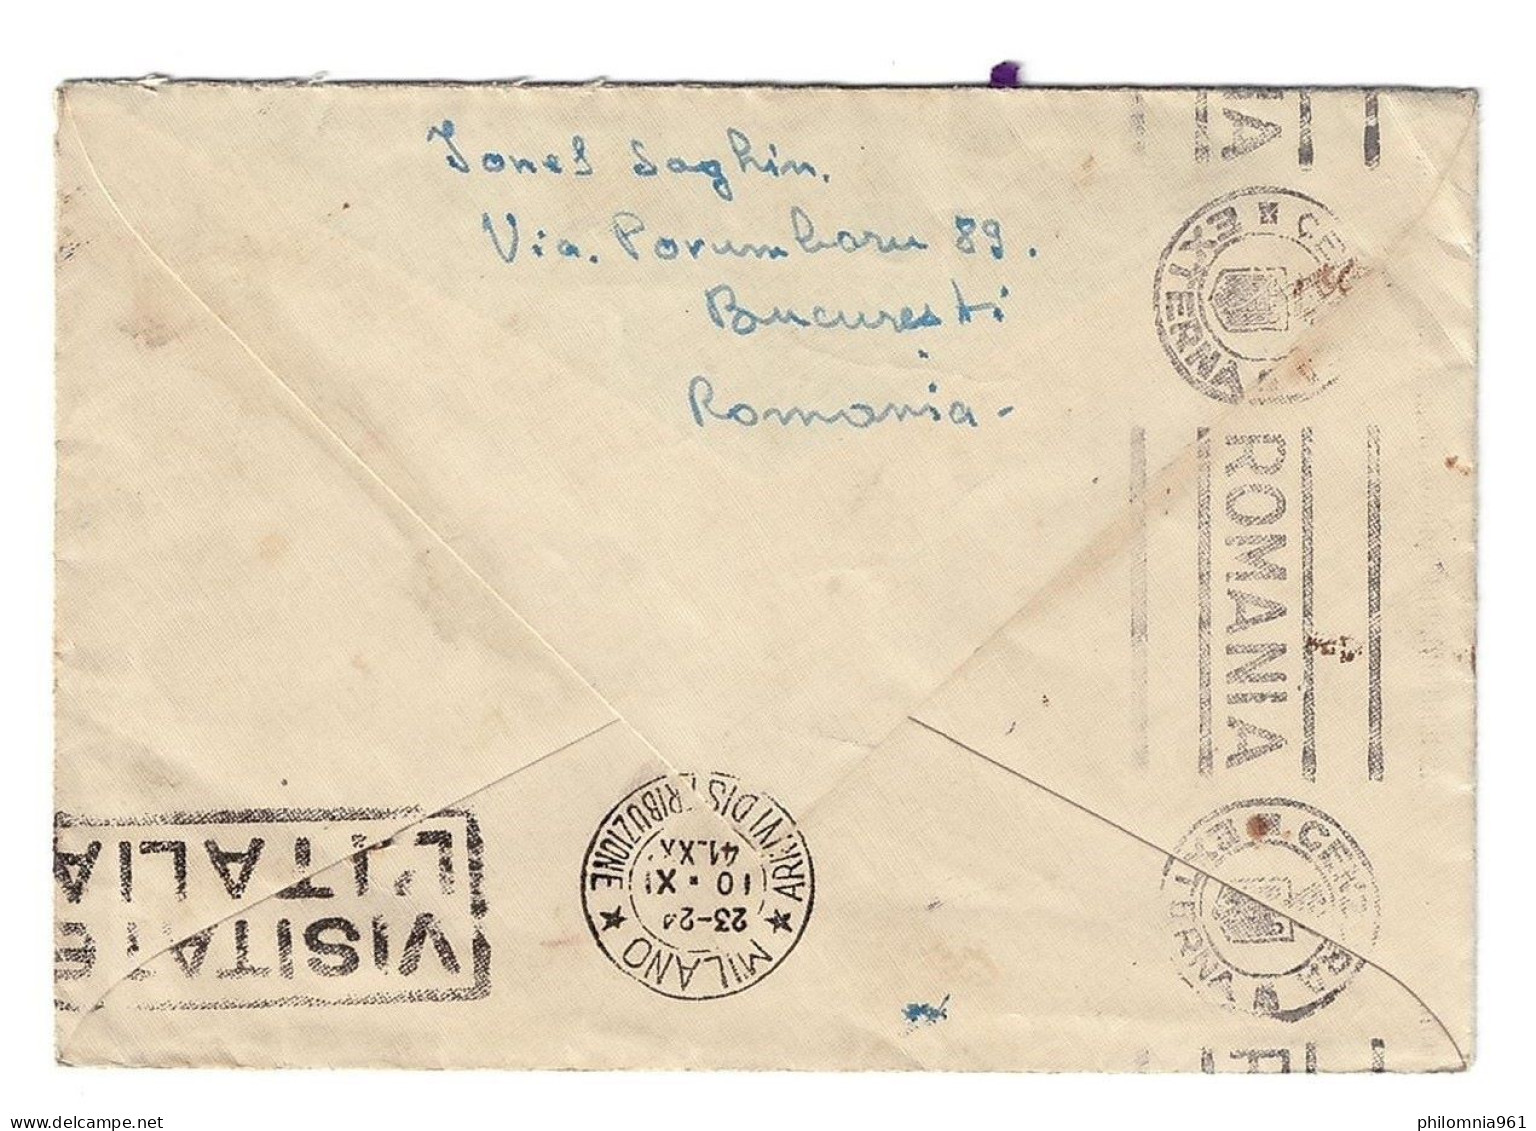 Romania Paneasa CENSORED AIRMAIL COVER To Milan Italy 1941 - World War 2 Letters